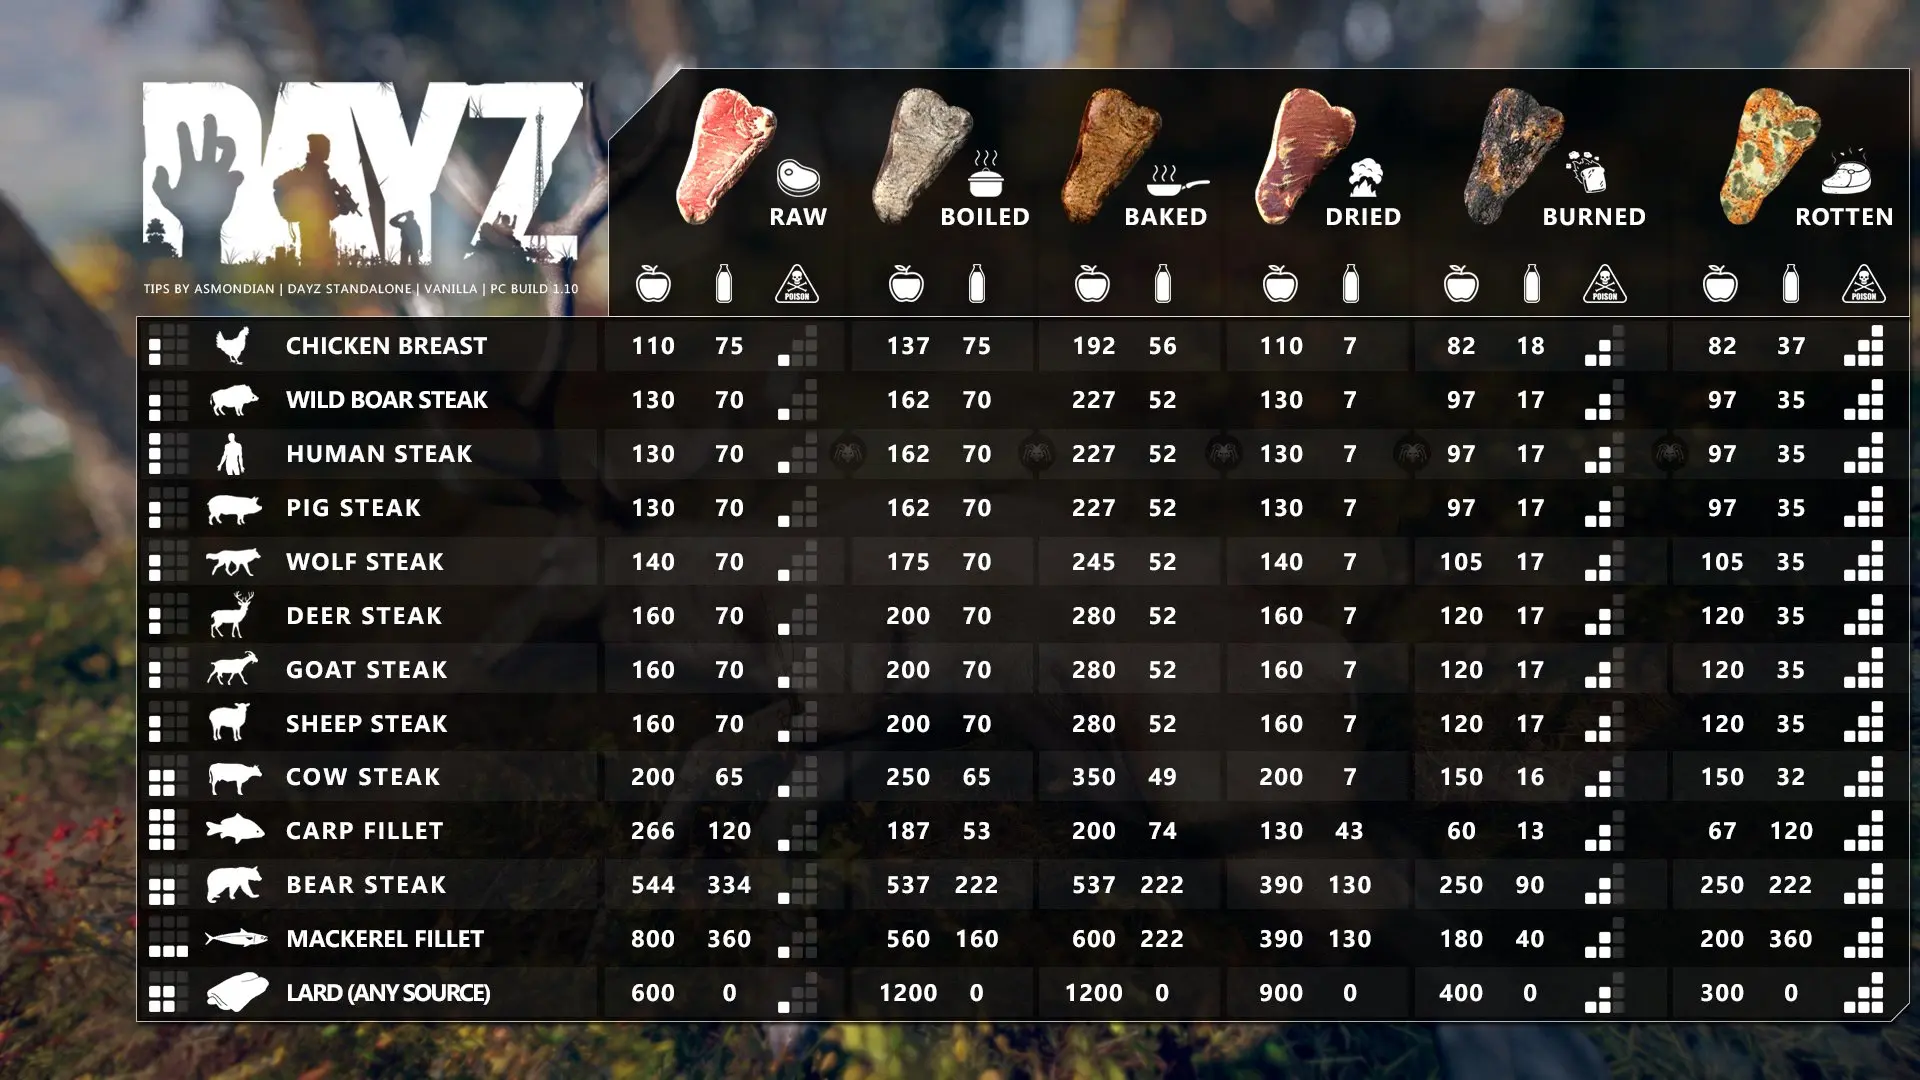 dayz how long does smoked meat last - How long does it take for meat to go bad in DAYZ